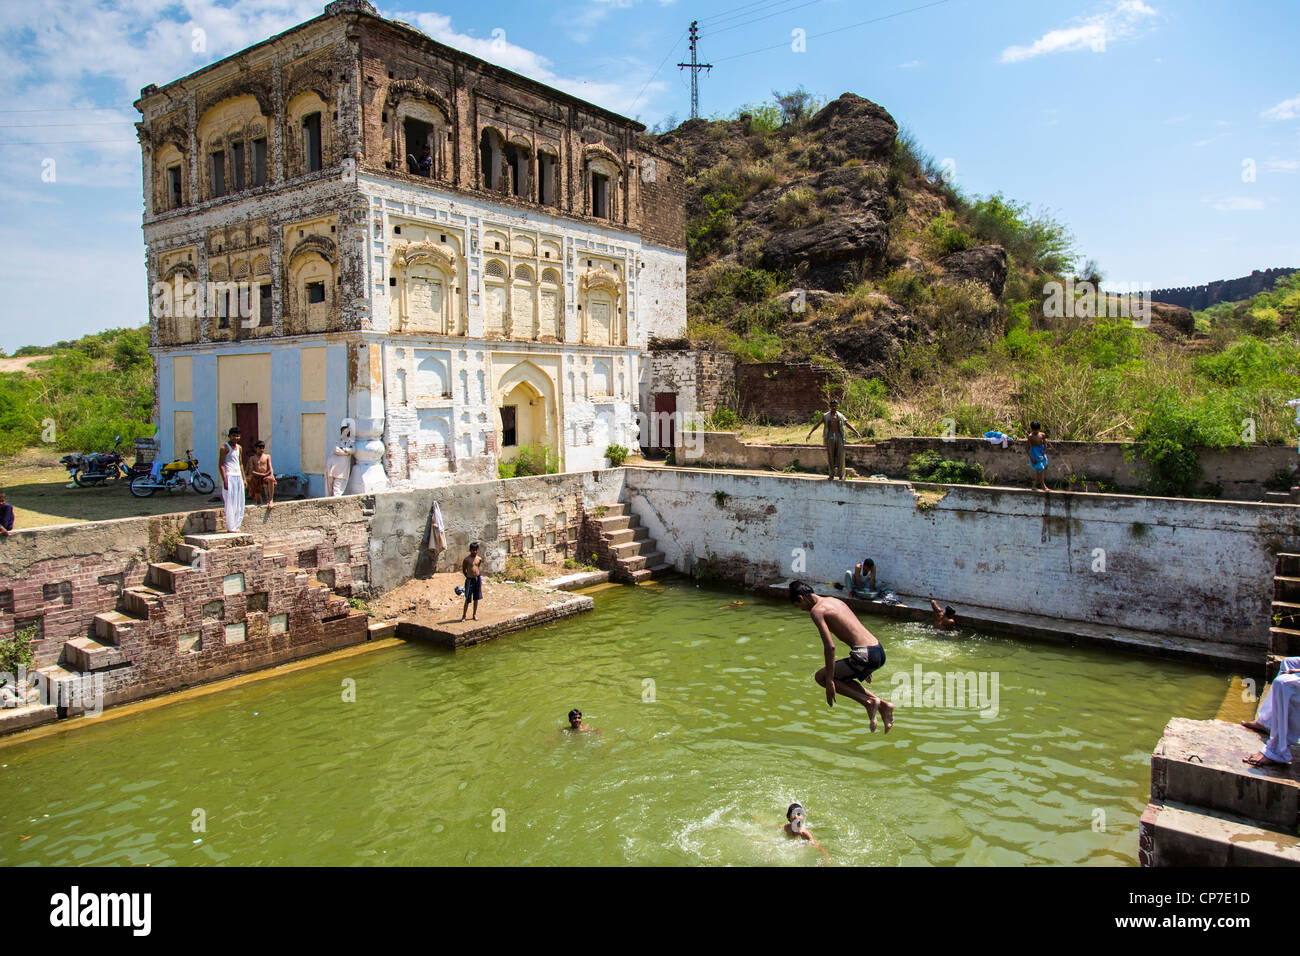 Boys swimming in the tank of a Haveli outside Rhotas Fort in Punjab Province, Pakistan Stock Photo